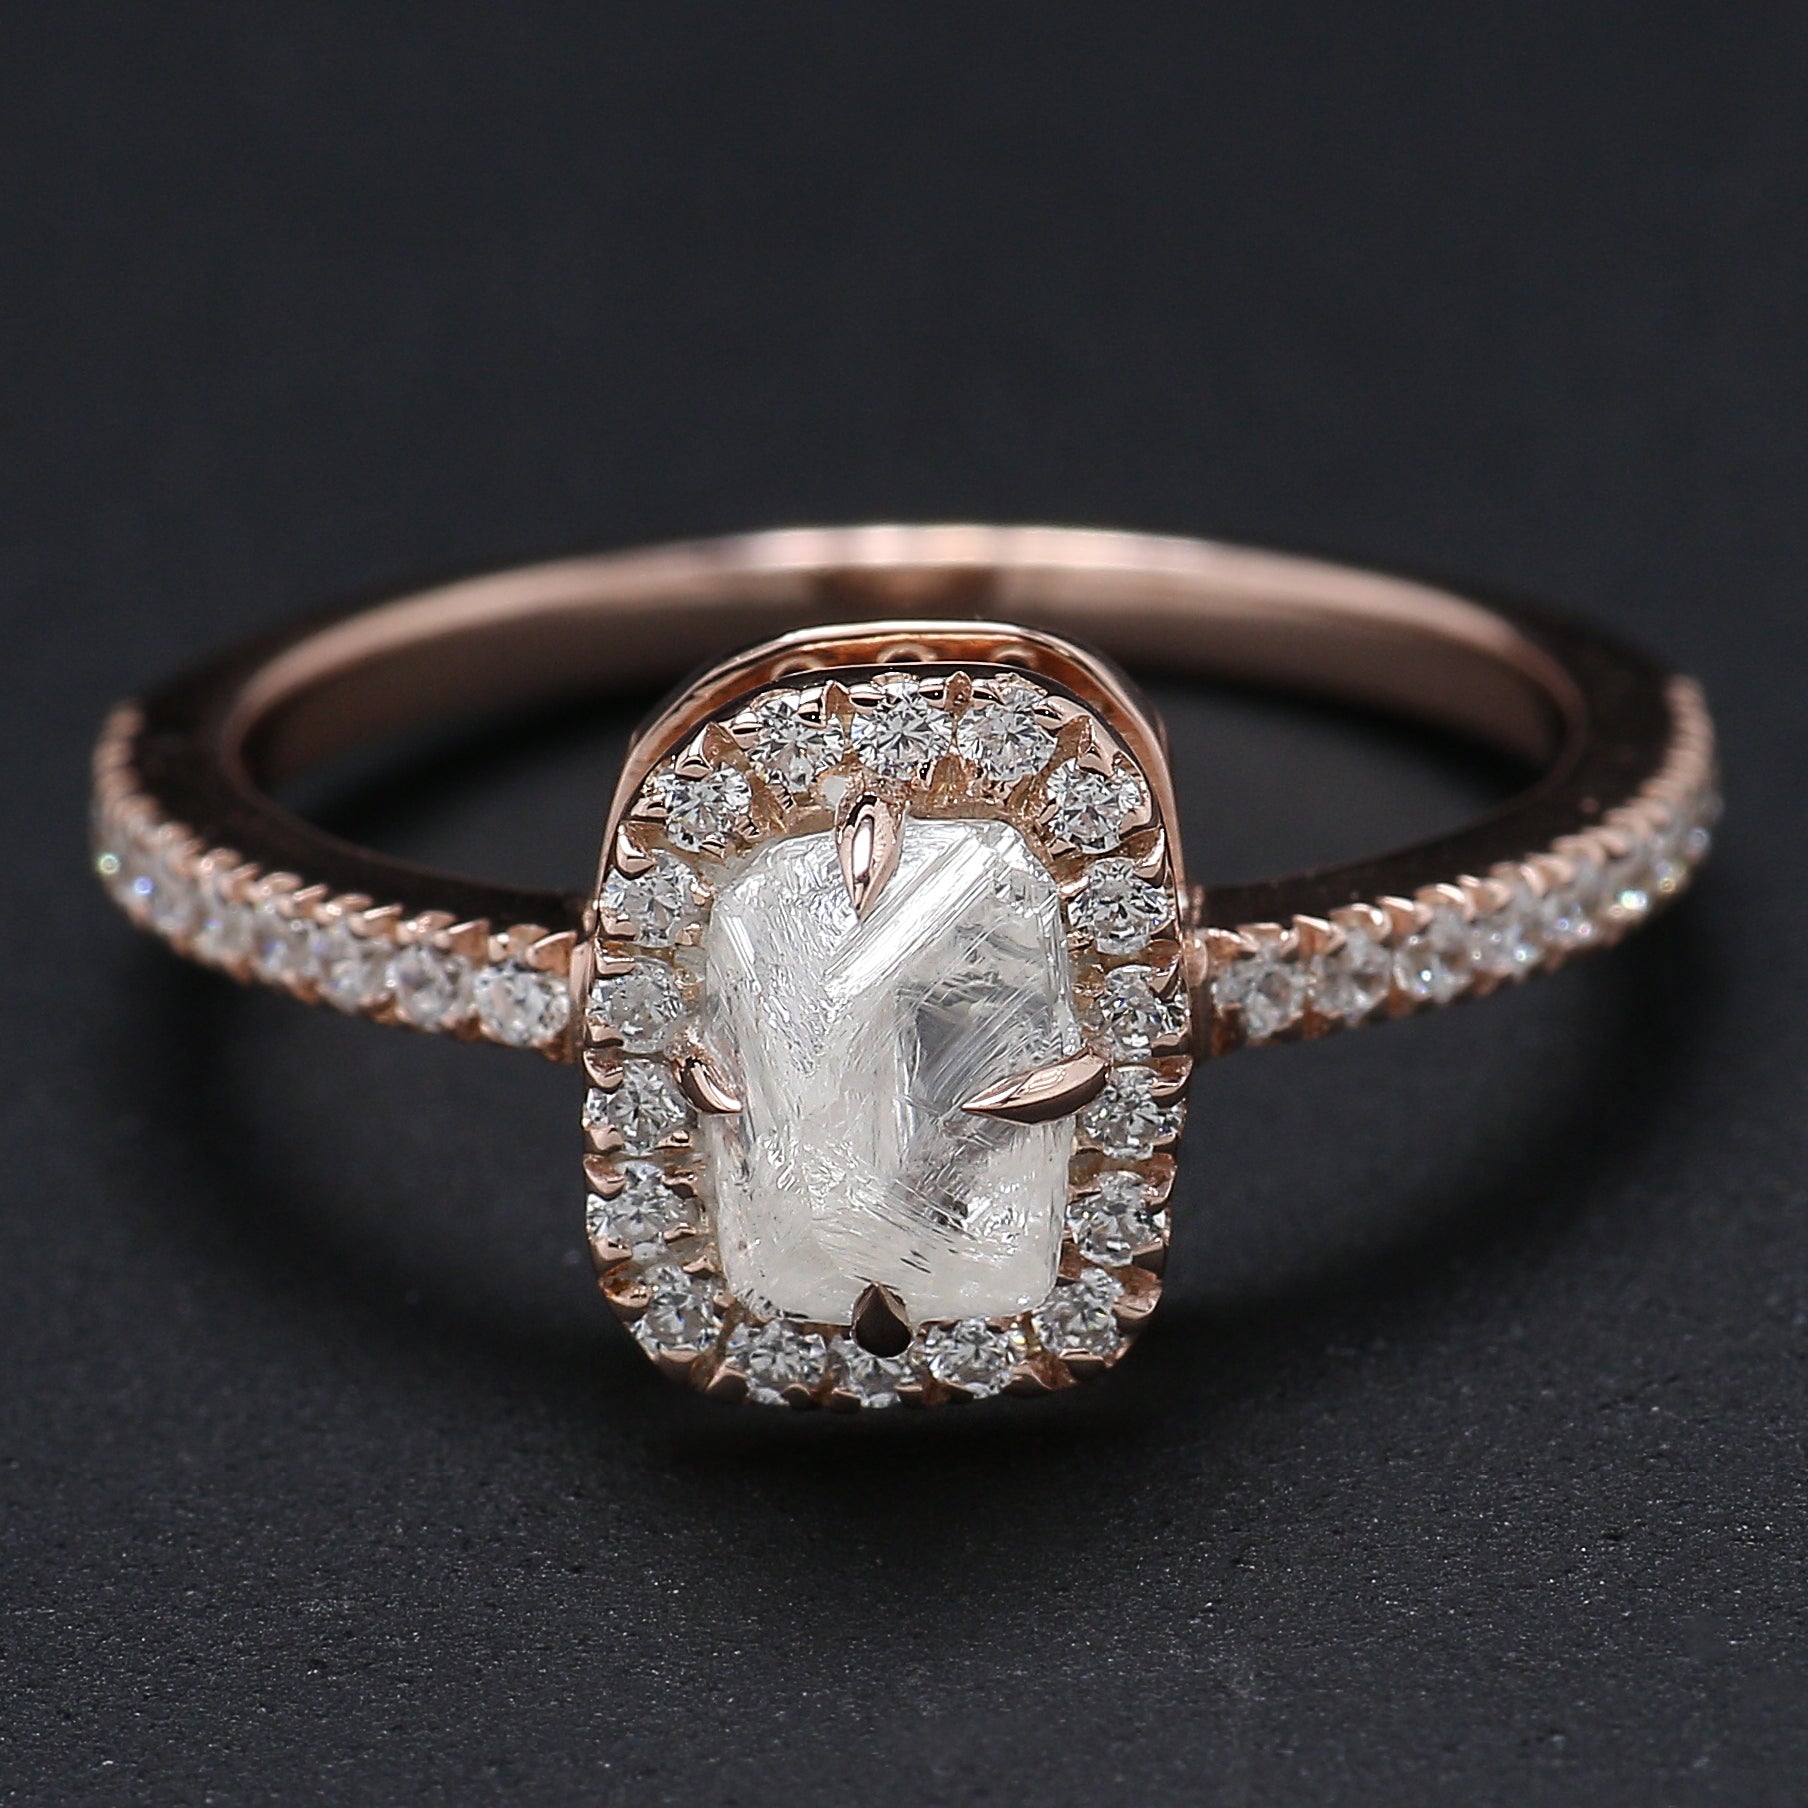 Rough White-F Color Diamond Ring 1.40 Ct 6.86 MM Crystal Rough Diamond Ring 14K Solid Rose Gold Silver Engagement Ring Gift For Her KDL2496